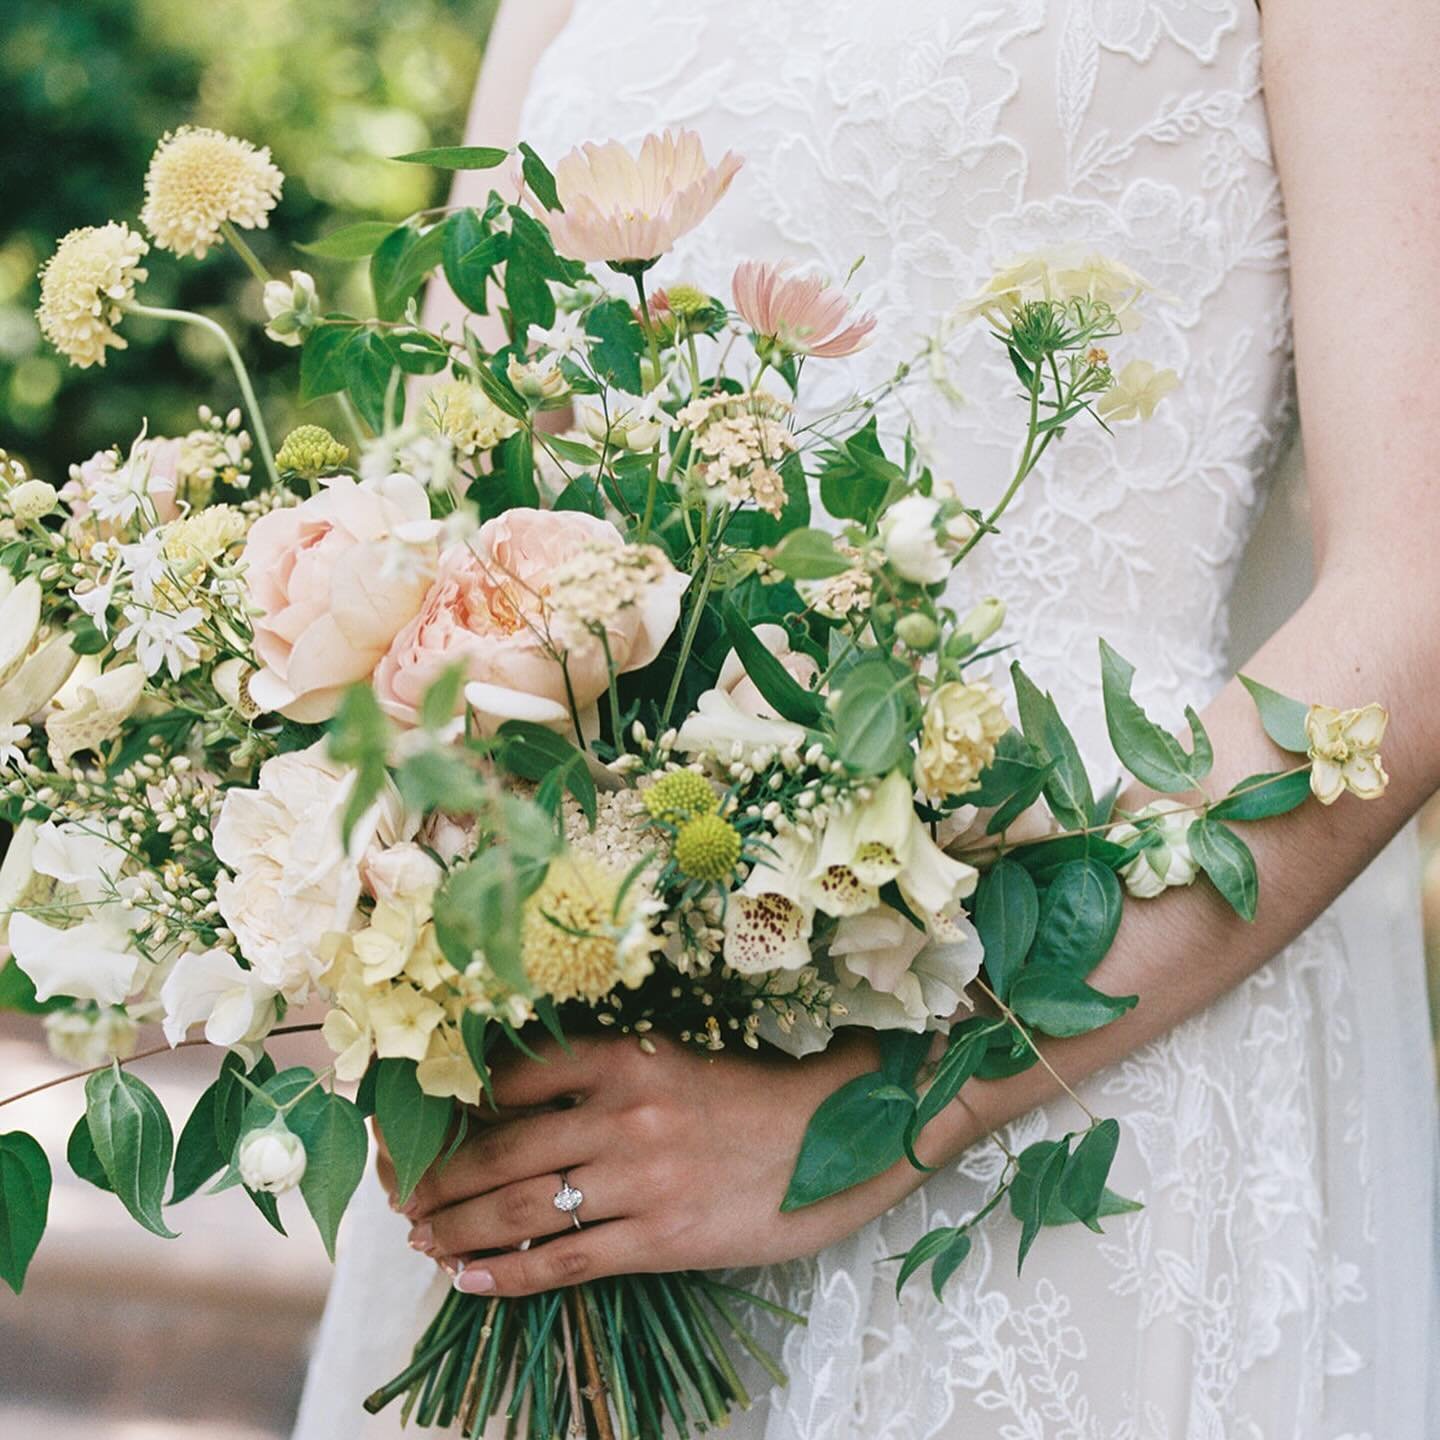 Which flowers transport you? I clipped my first bud of mock orange this morning and it immediately made me think of last year&rsquo;s sweet bride, Elizabeth. Her bouquet was one of my favorites, filled with so many late spring treasures from the farm